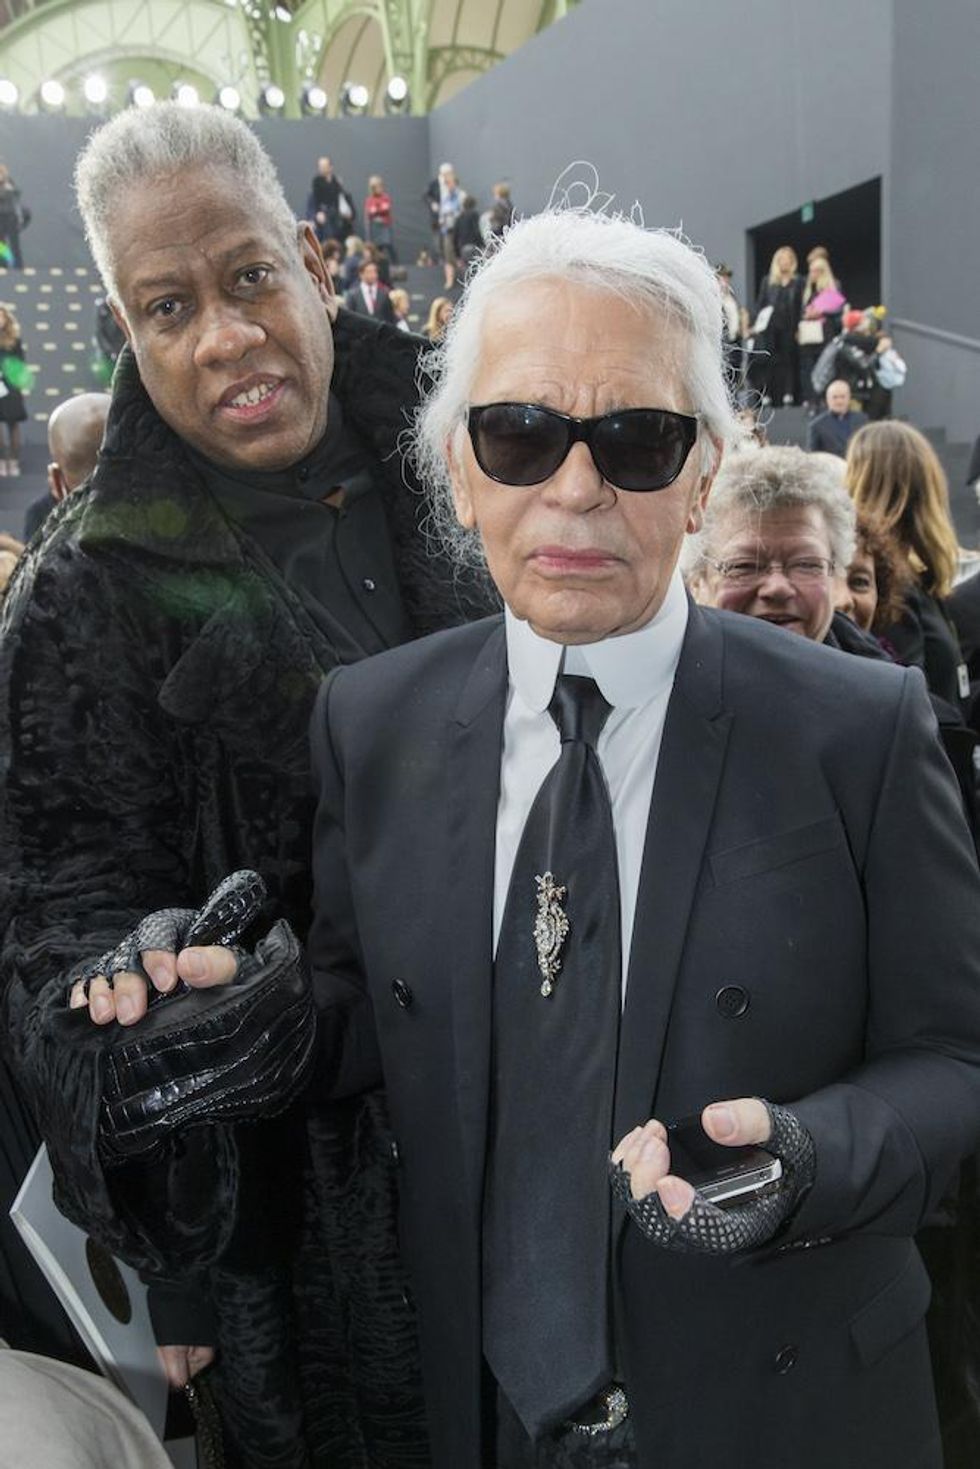 Andre Leon Talley and Karl Lagerfeld